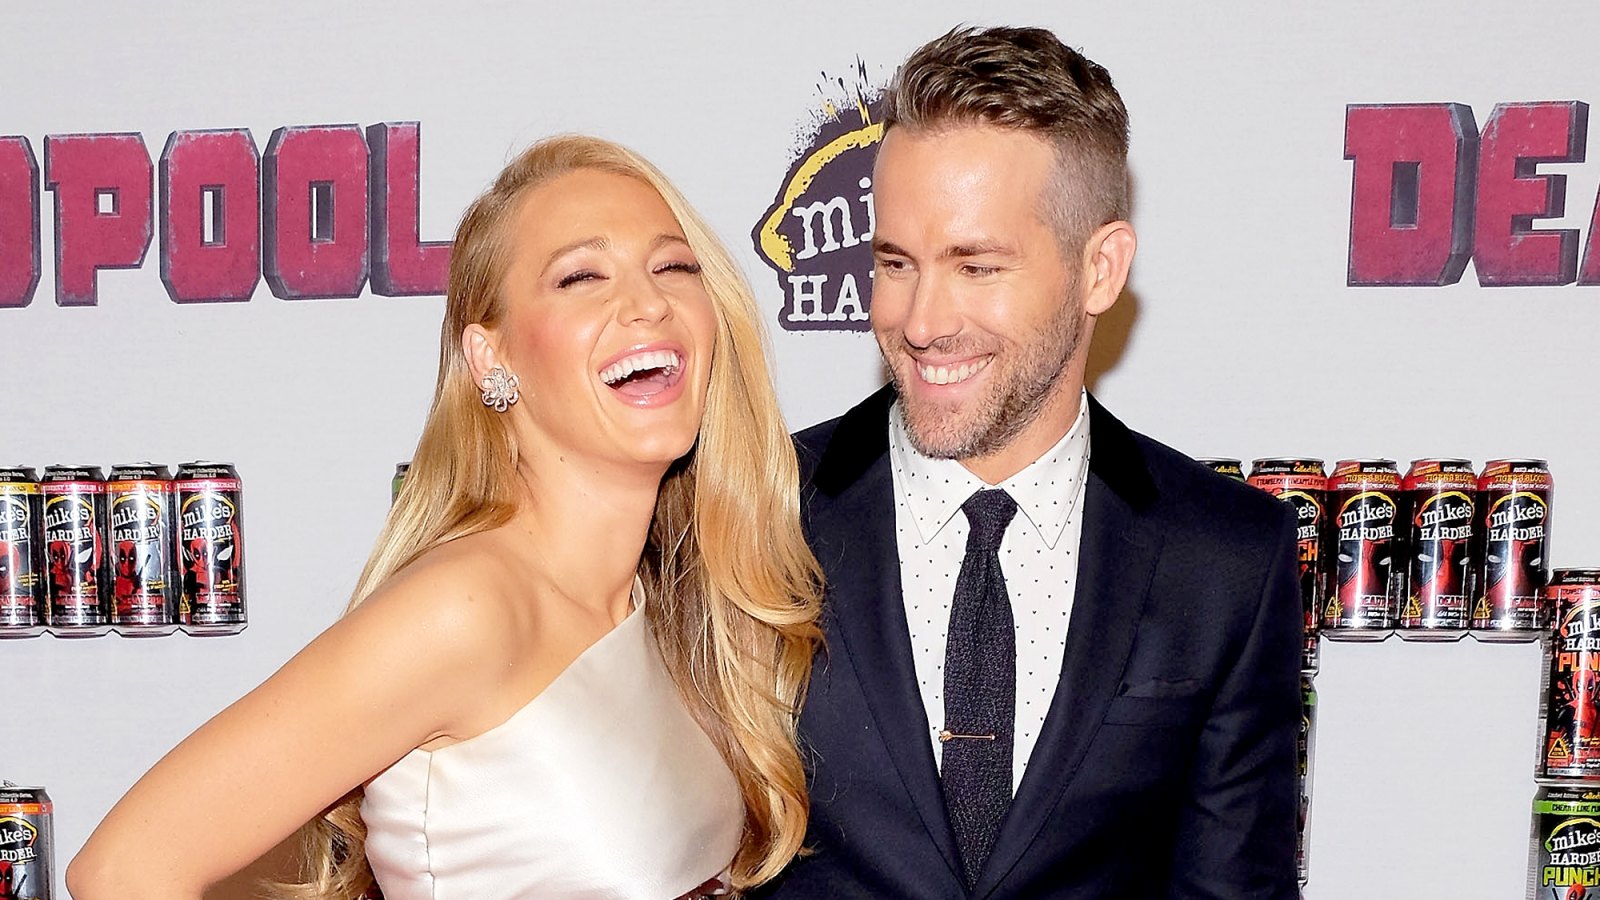 Blake Lively and Ryan Reynolds attend the "Deadpool" fan event at AMC Empire Theatre on February 8, 2016 in New York City.